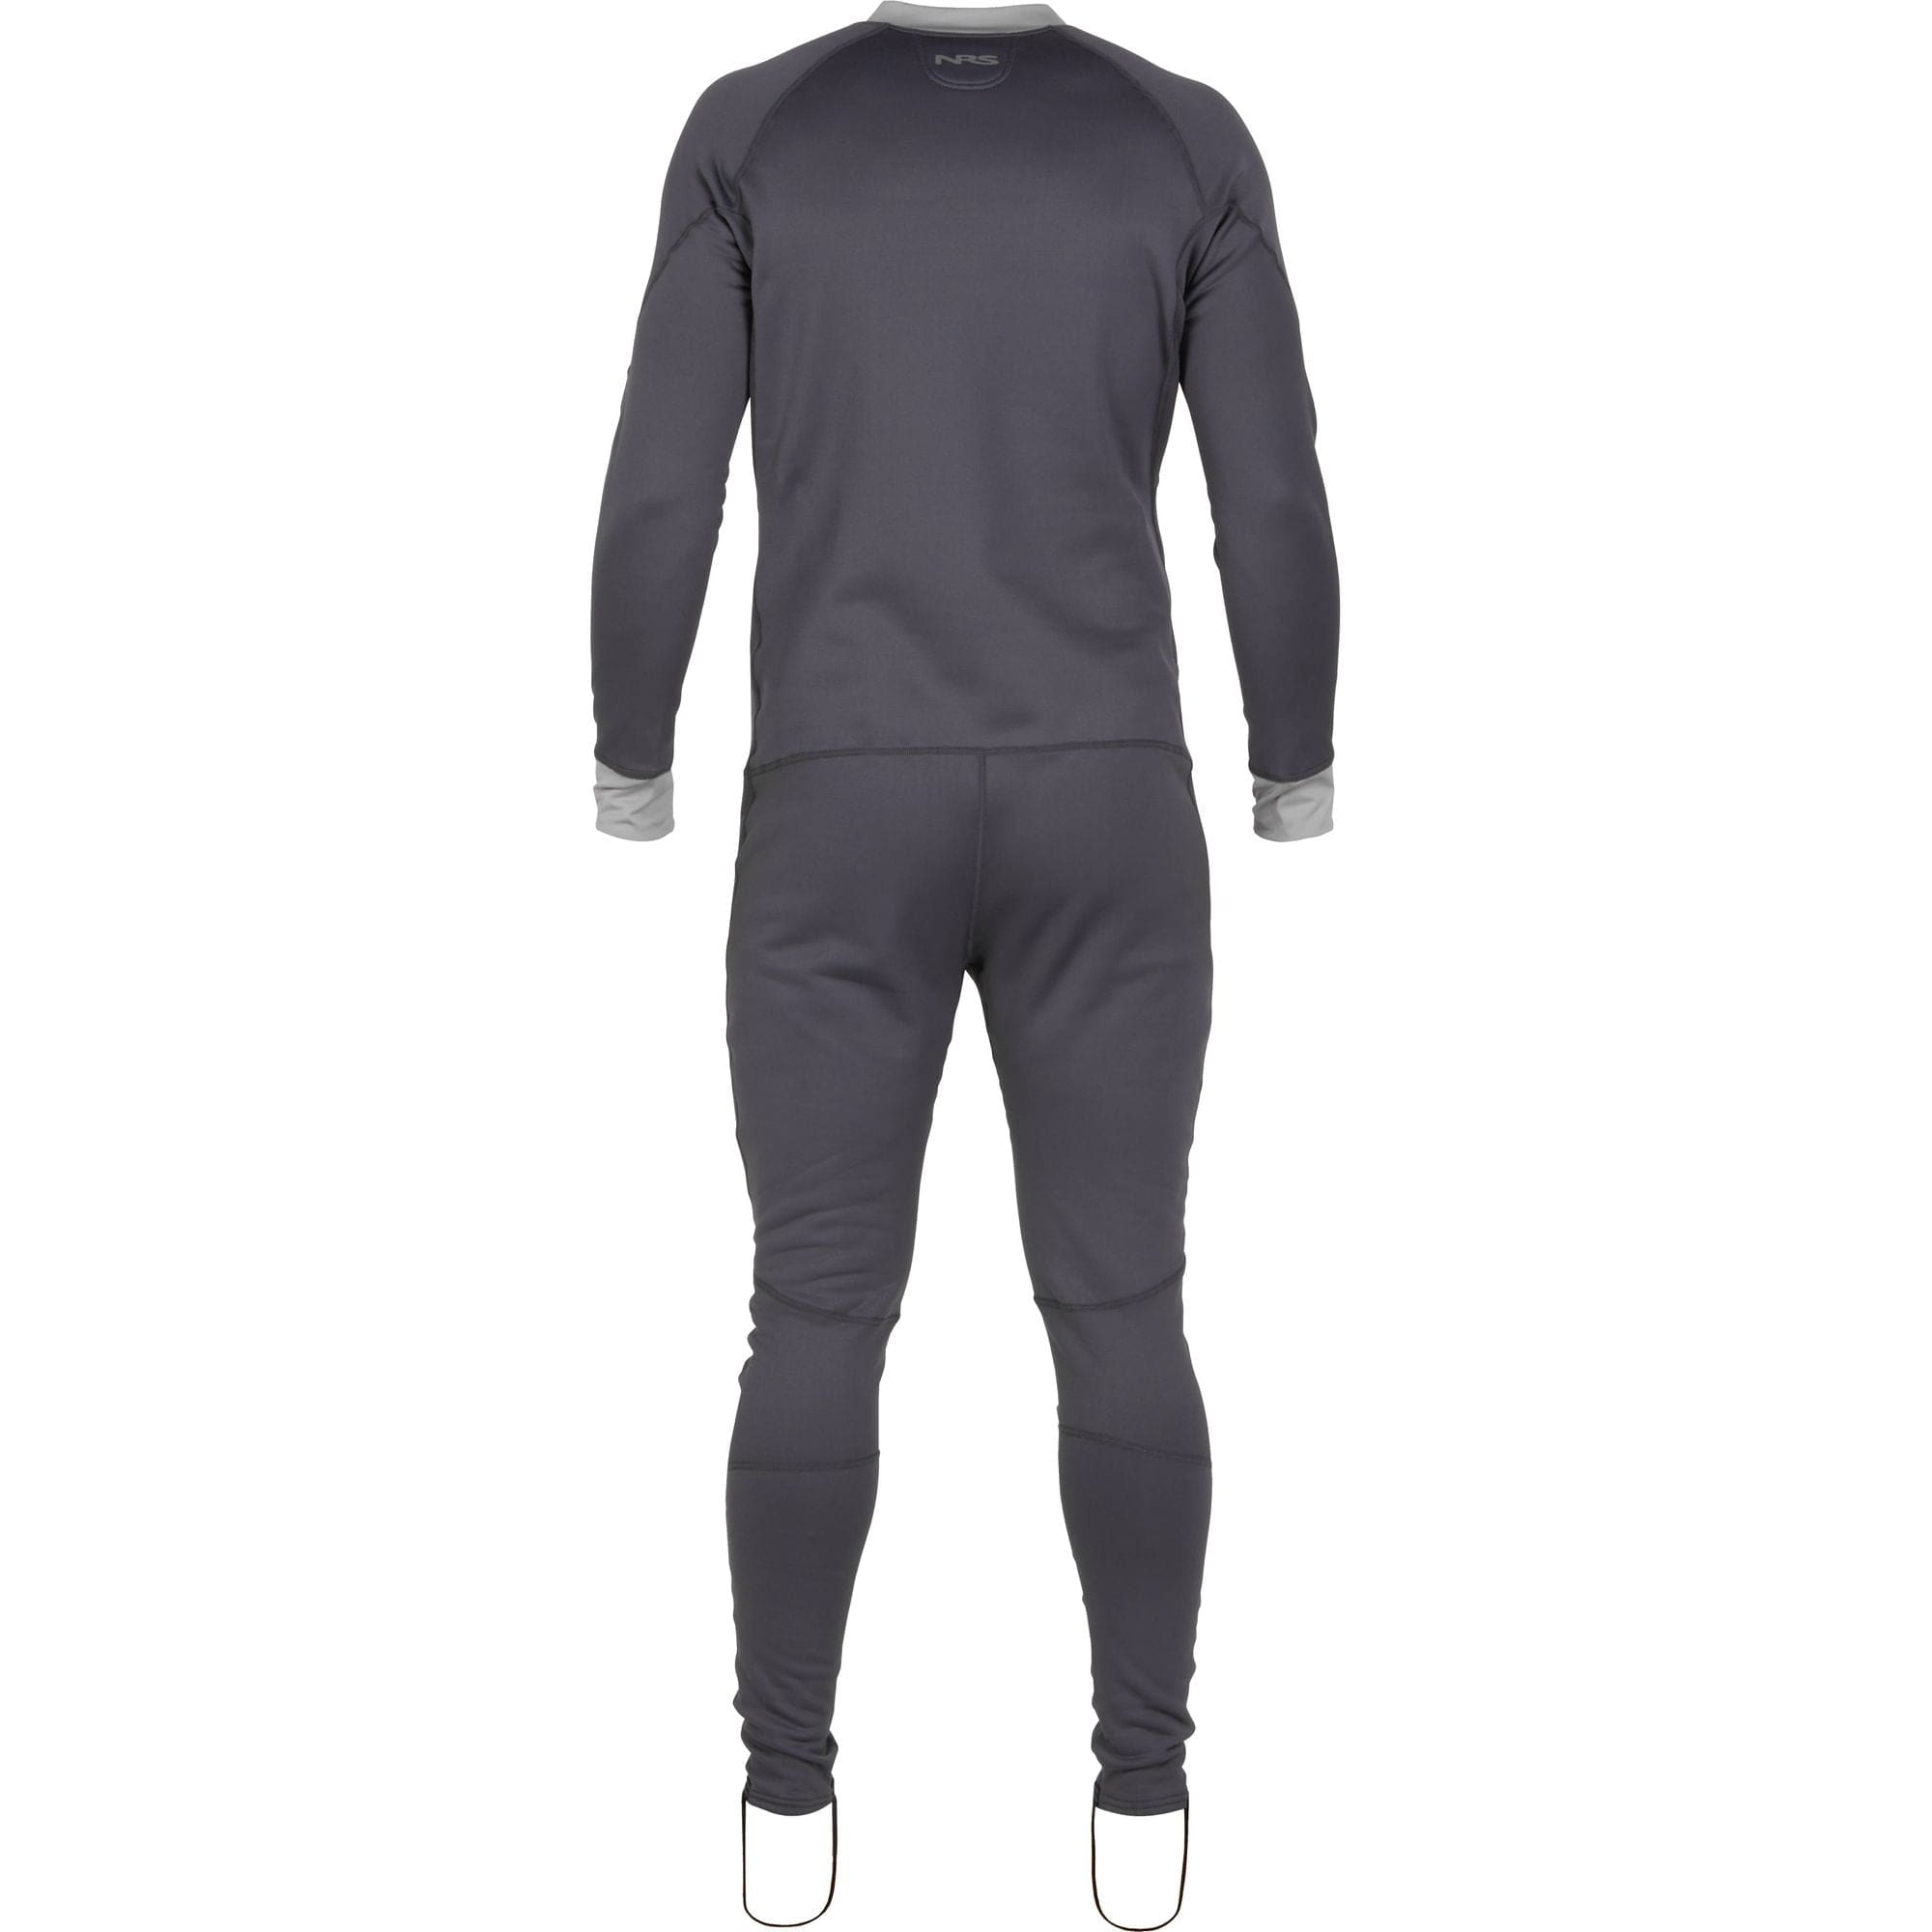 2023 NRS Men's Expedition Weight Union Suit